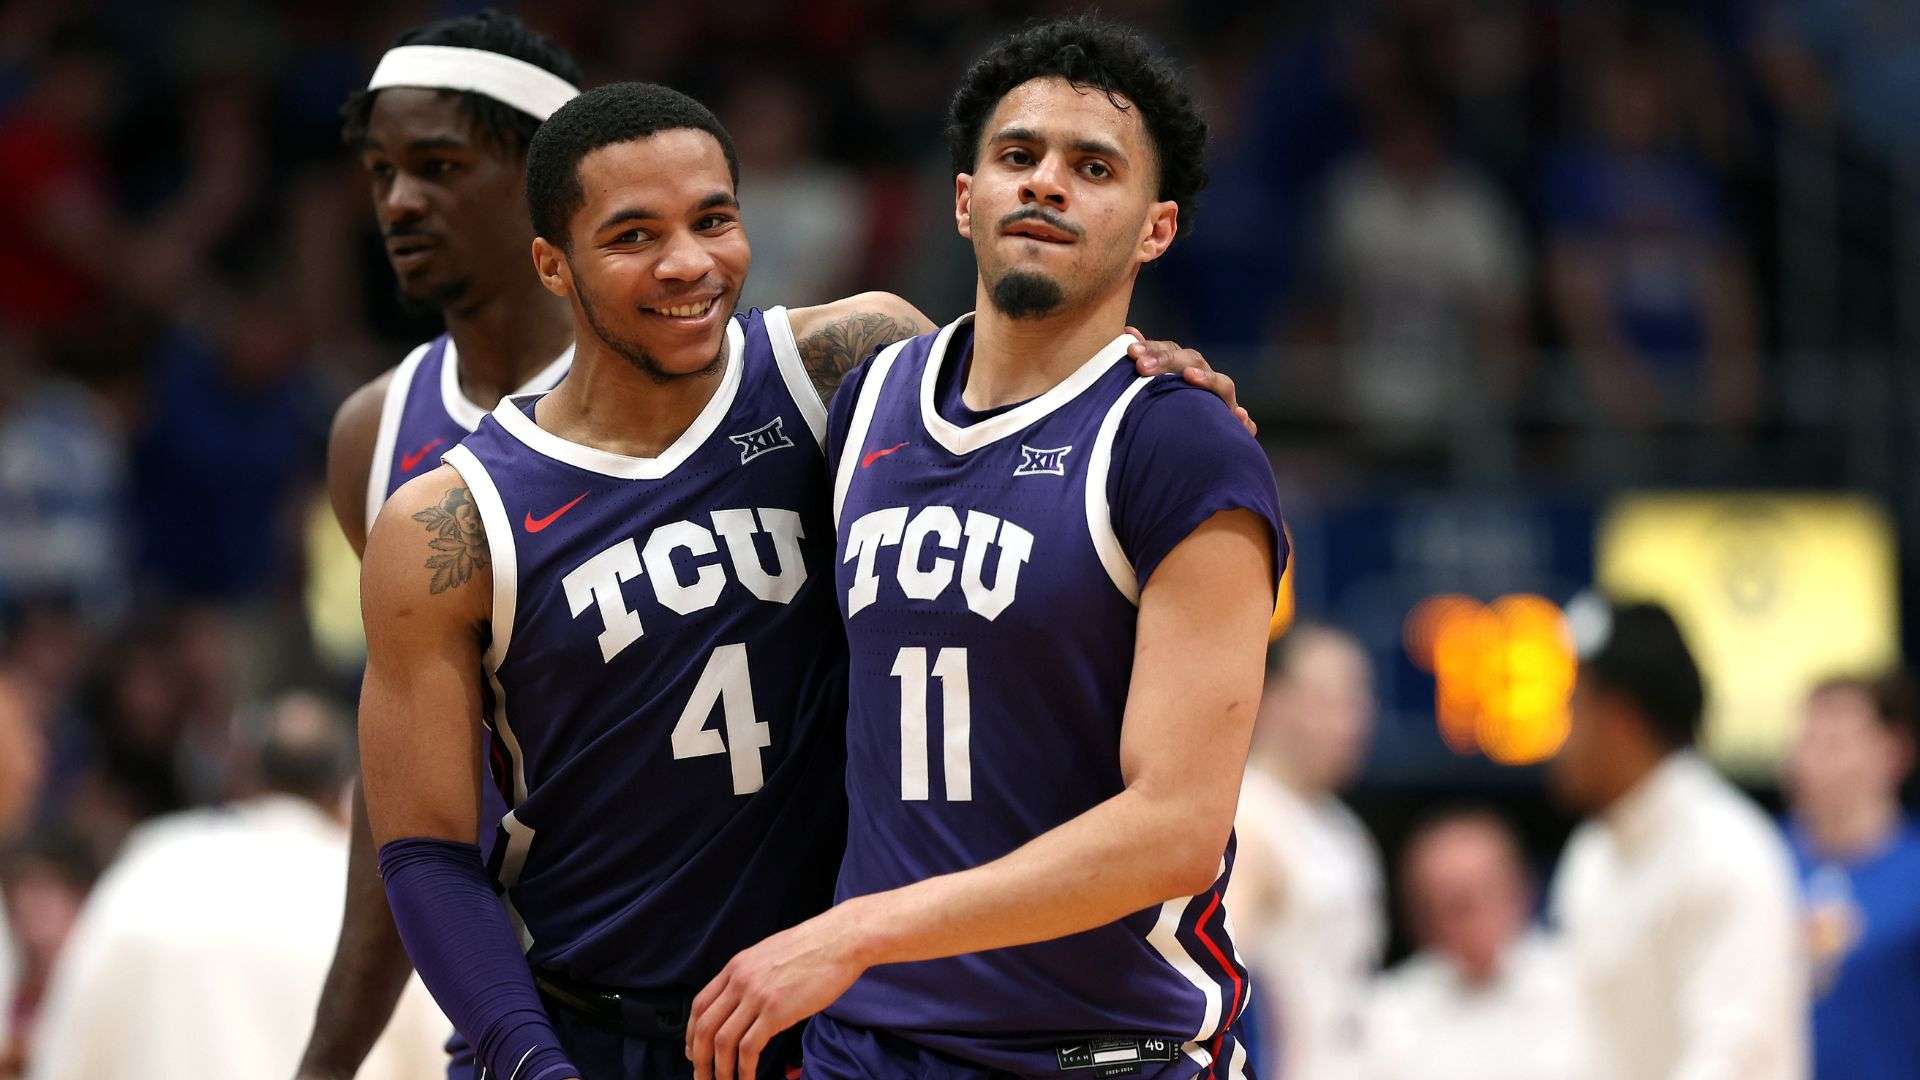 NCAA March Madness Jameer Nelson Jr. #4 and Trevian Tennyson #11 of the TCU Horned Frogs 